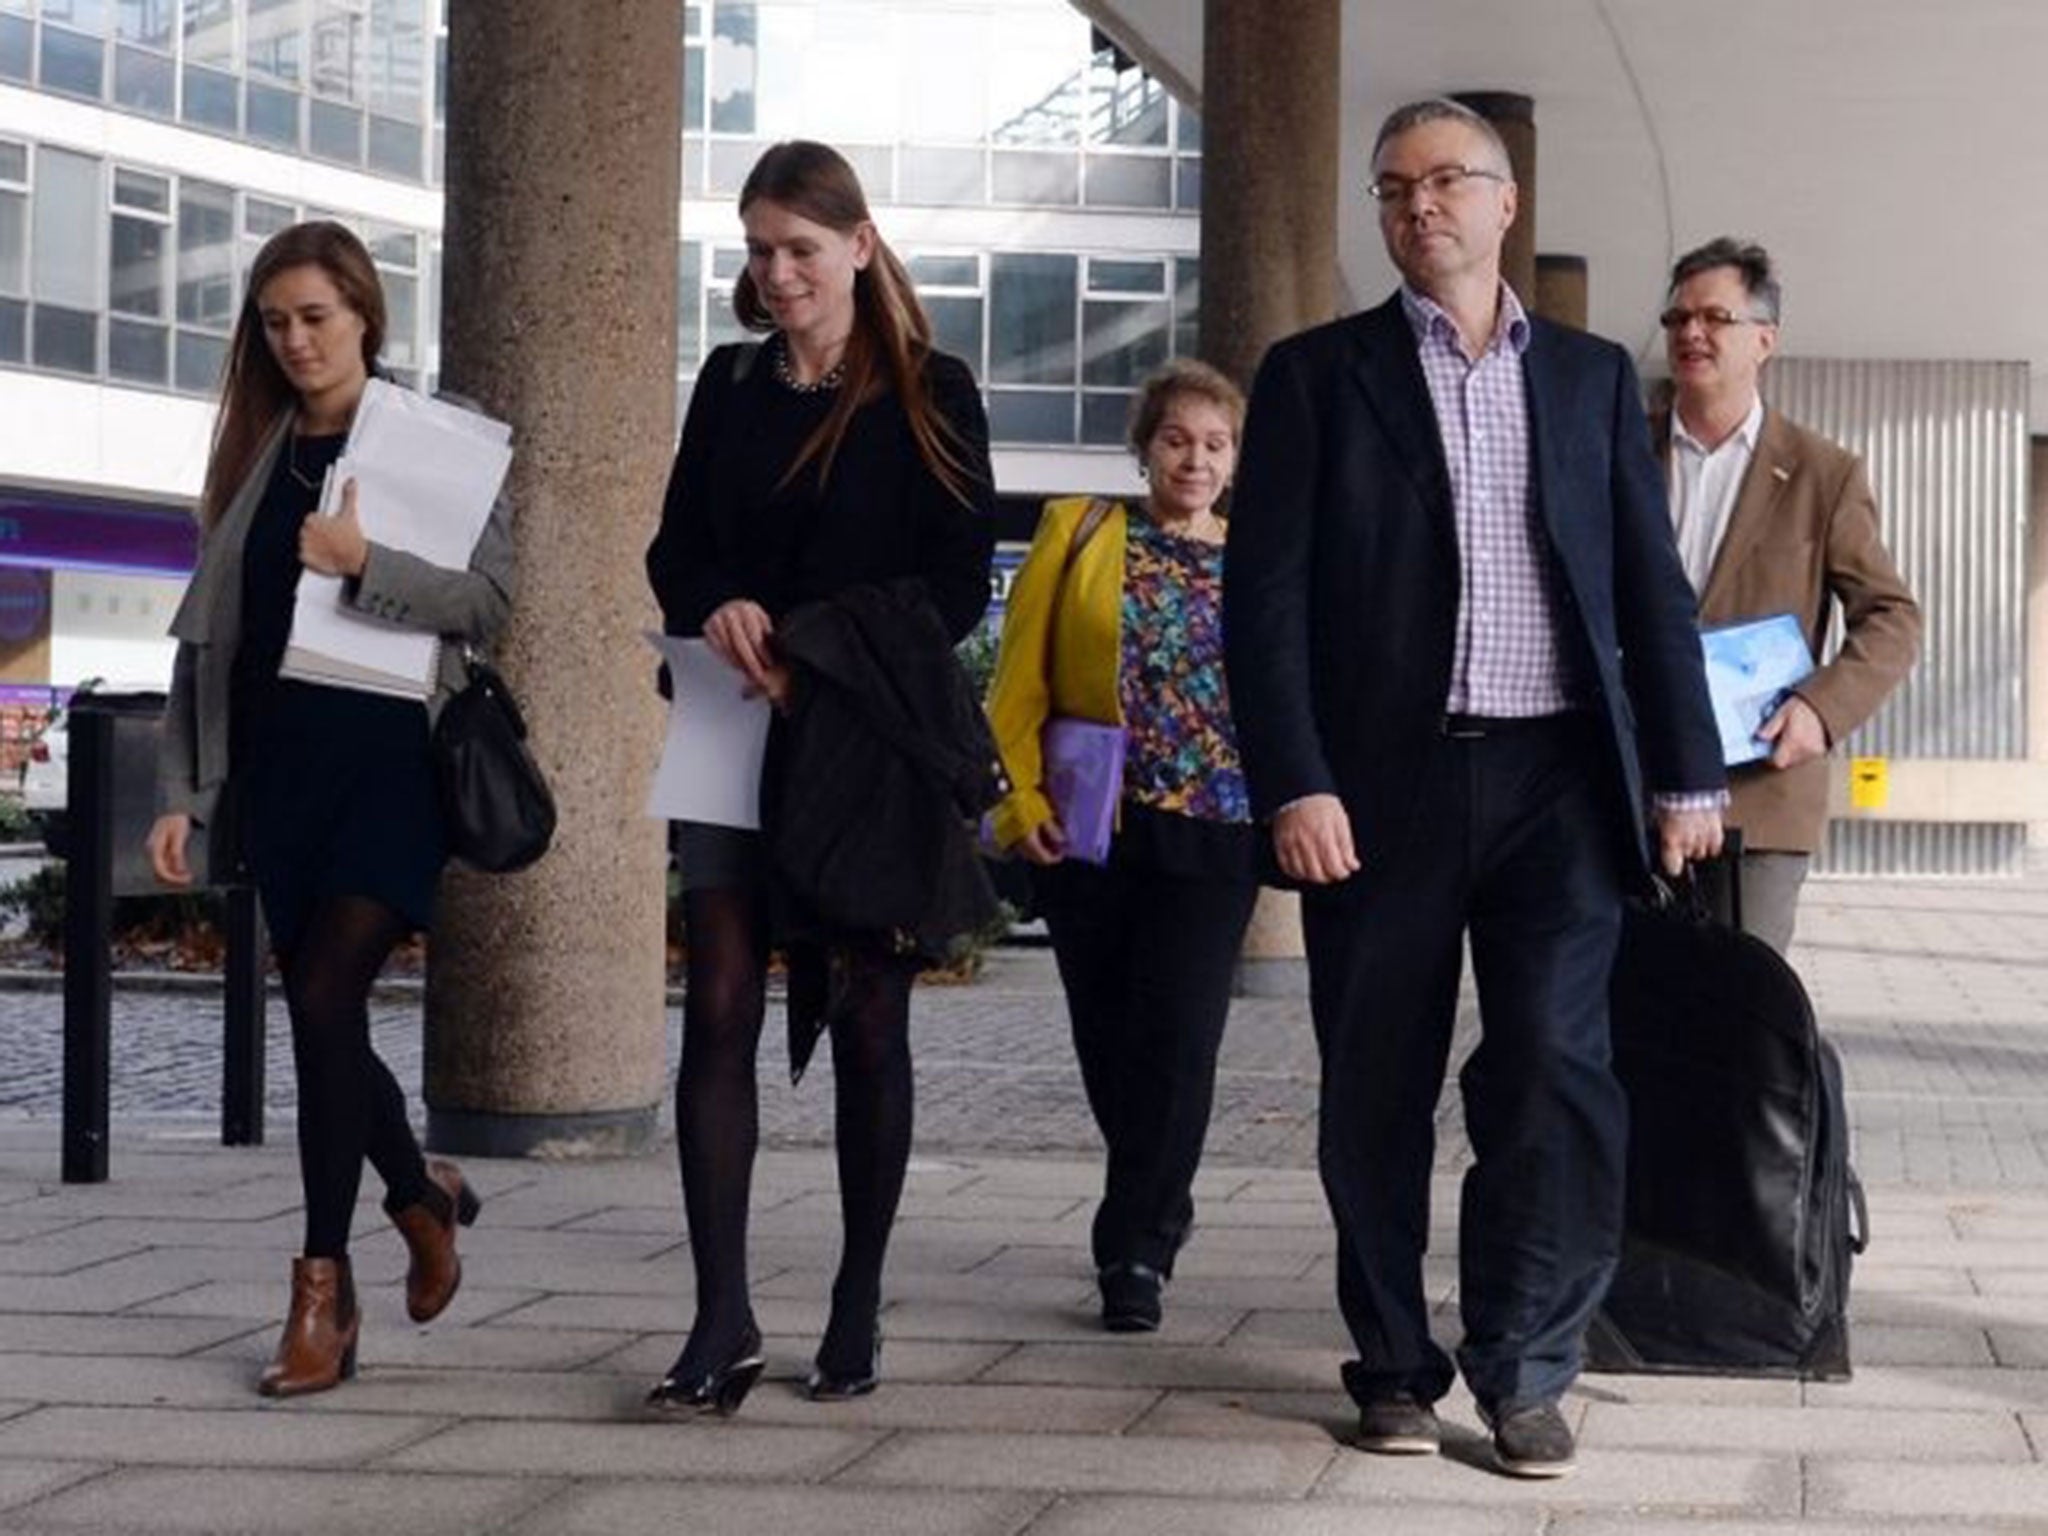 Representatives of child abuse victims arrive at a meeting in London